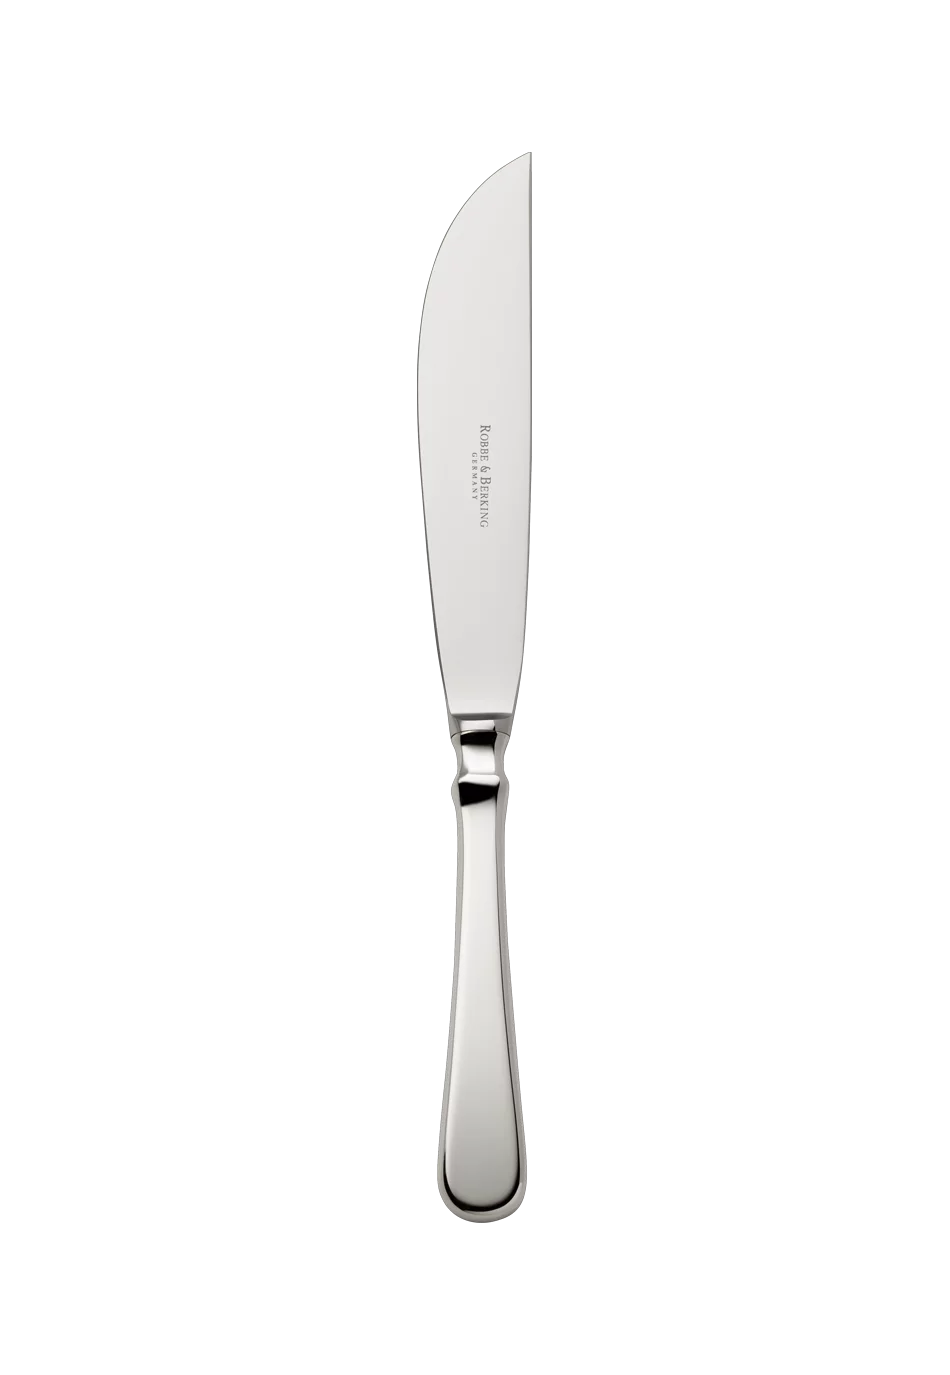 Spaten Carving Knife (150g massive silverplated)